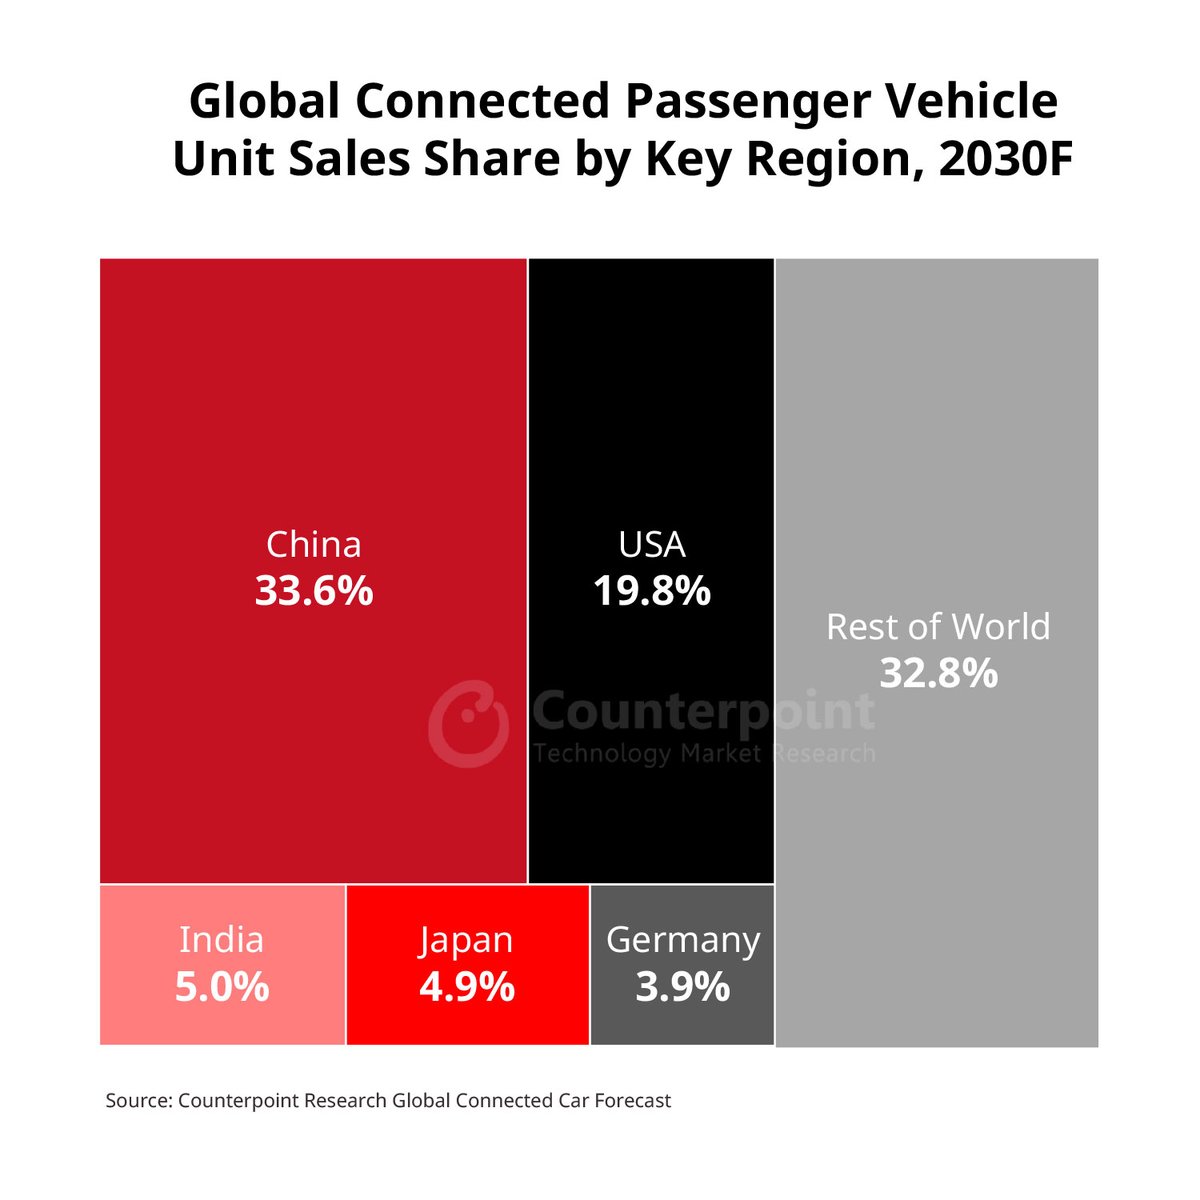 Just published: Global Connected Car Sales to Exceed 500 Million in 2024-2030

Key takeaways:
- About nine out of 10 #connectedcars sold in 2030 will have embedded #5G capability.
- #China is expected to lead the connected car sales market, followed by #USA, #India, #Japan and…